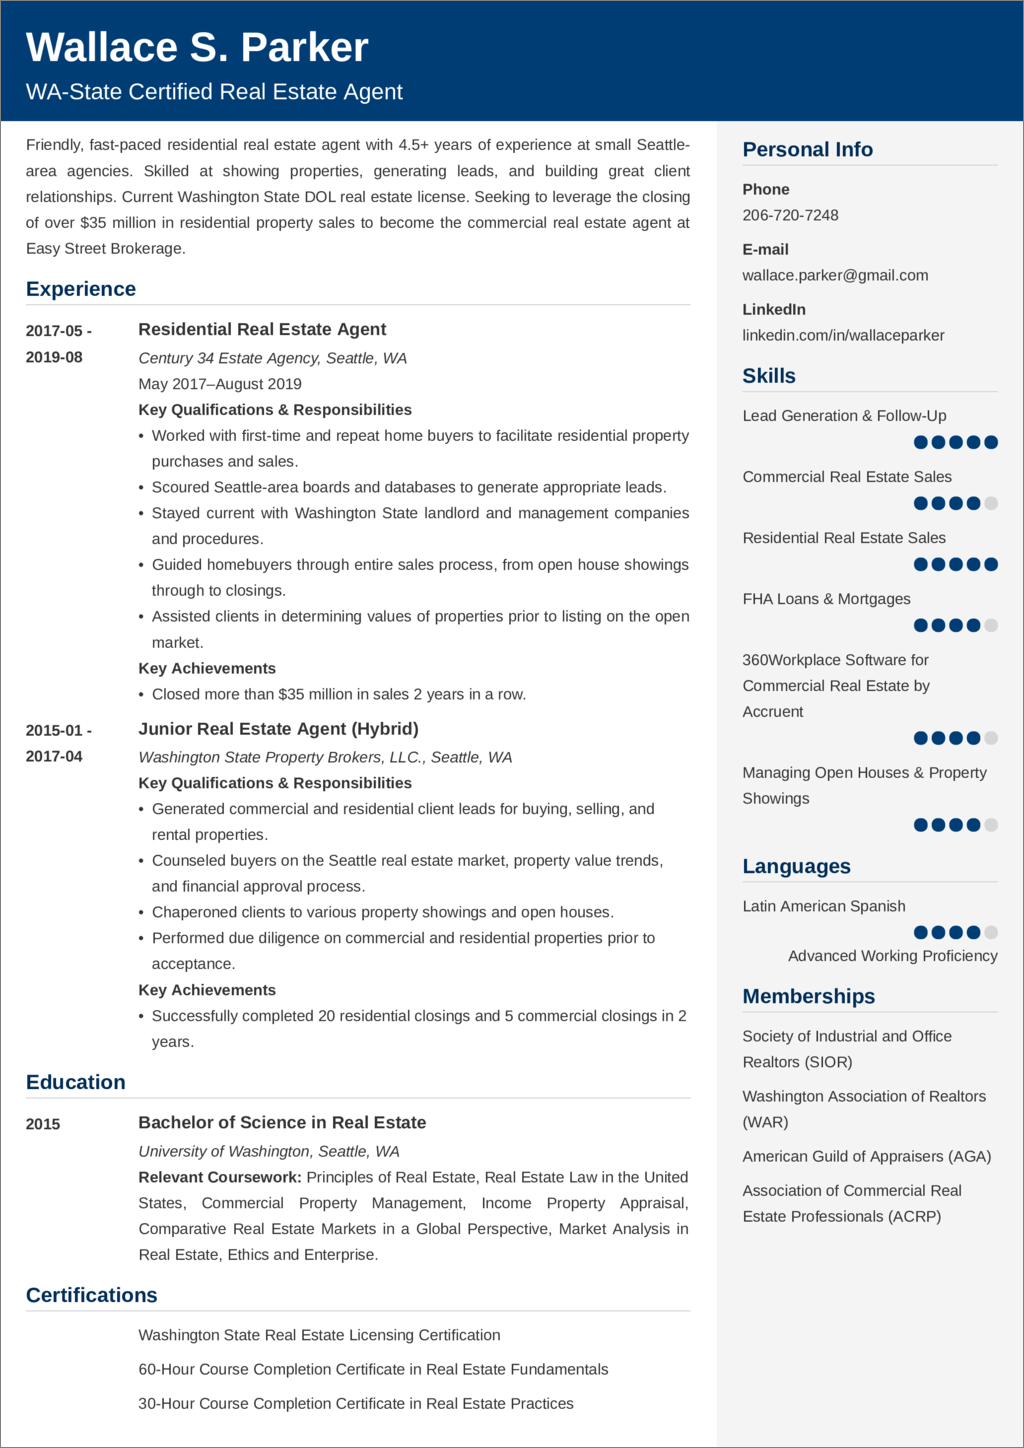 Real Estate Resume Example with Job Description Skills